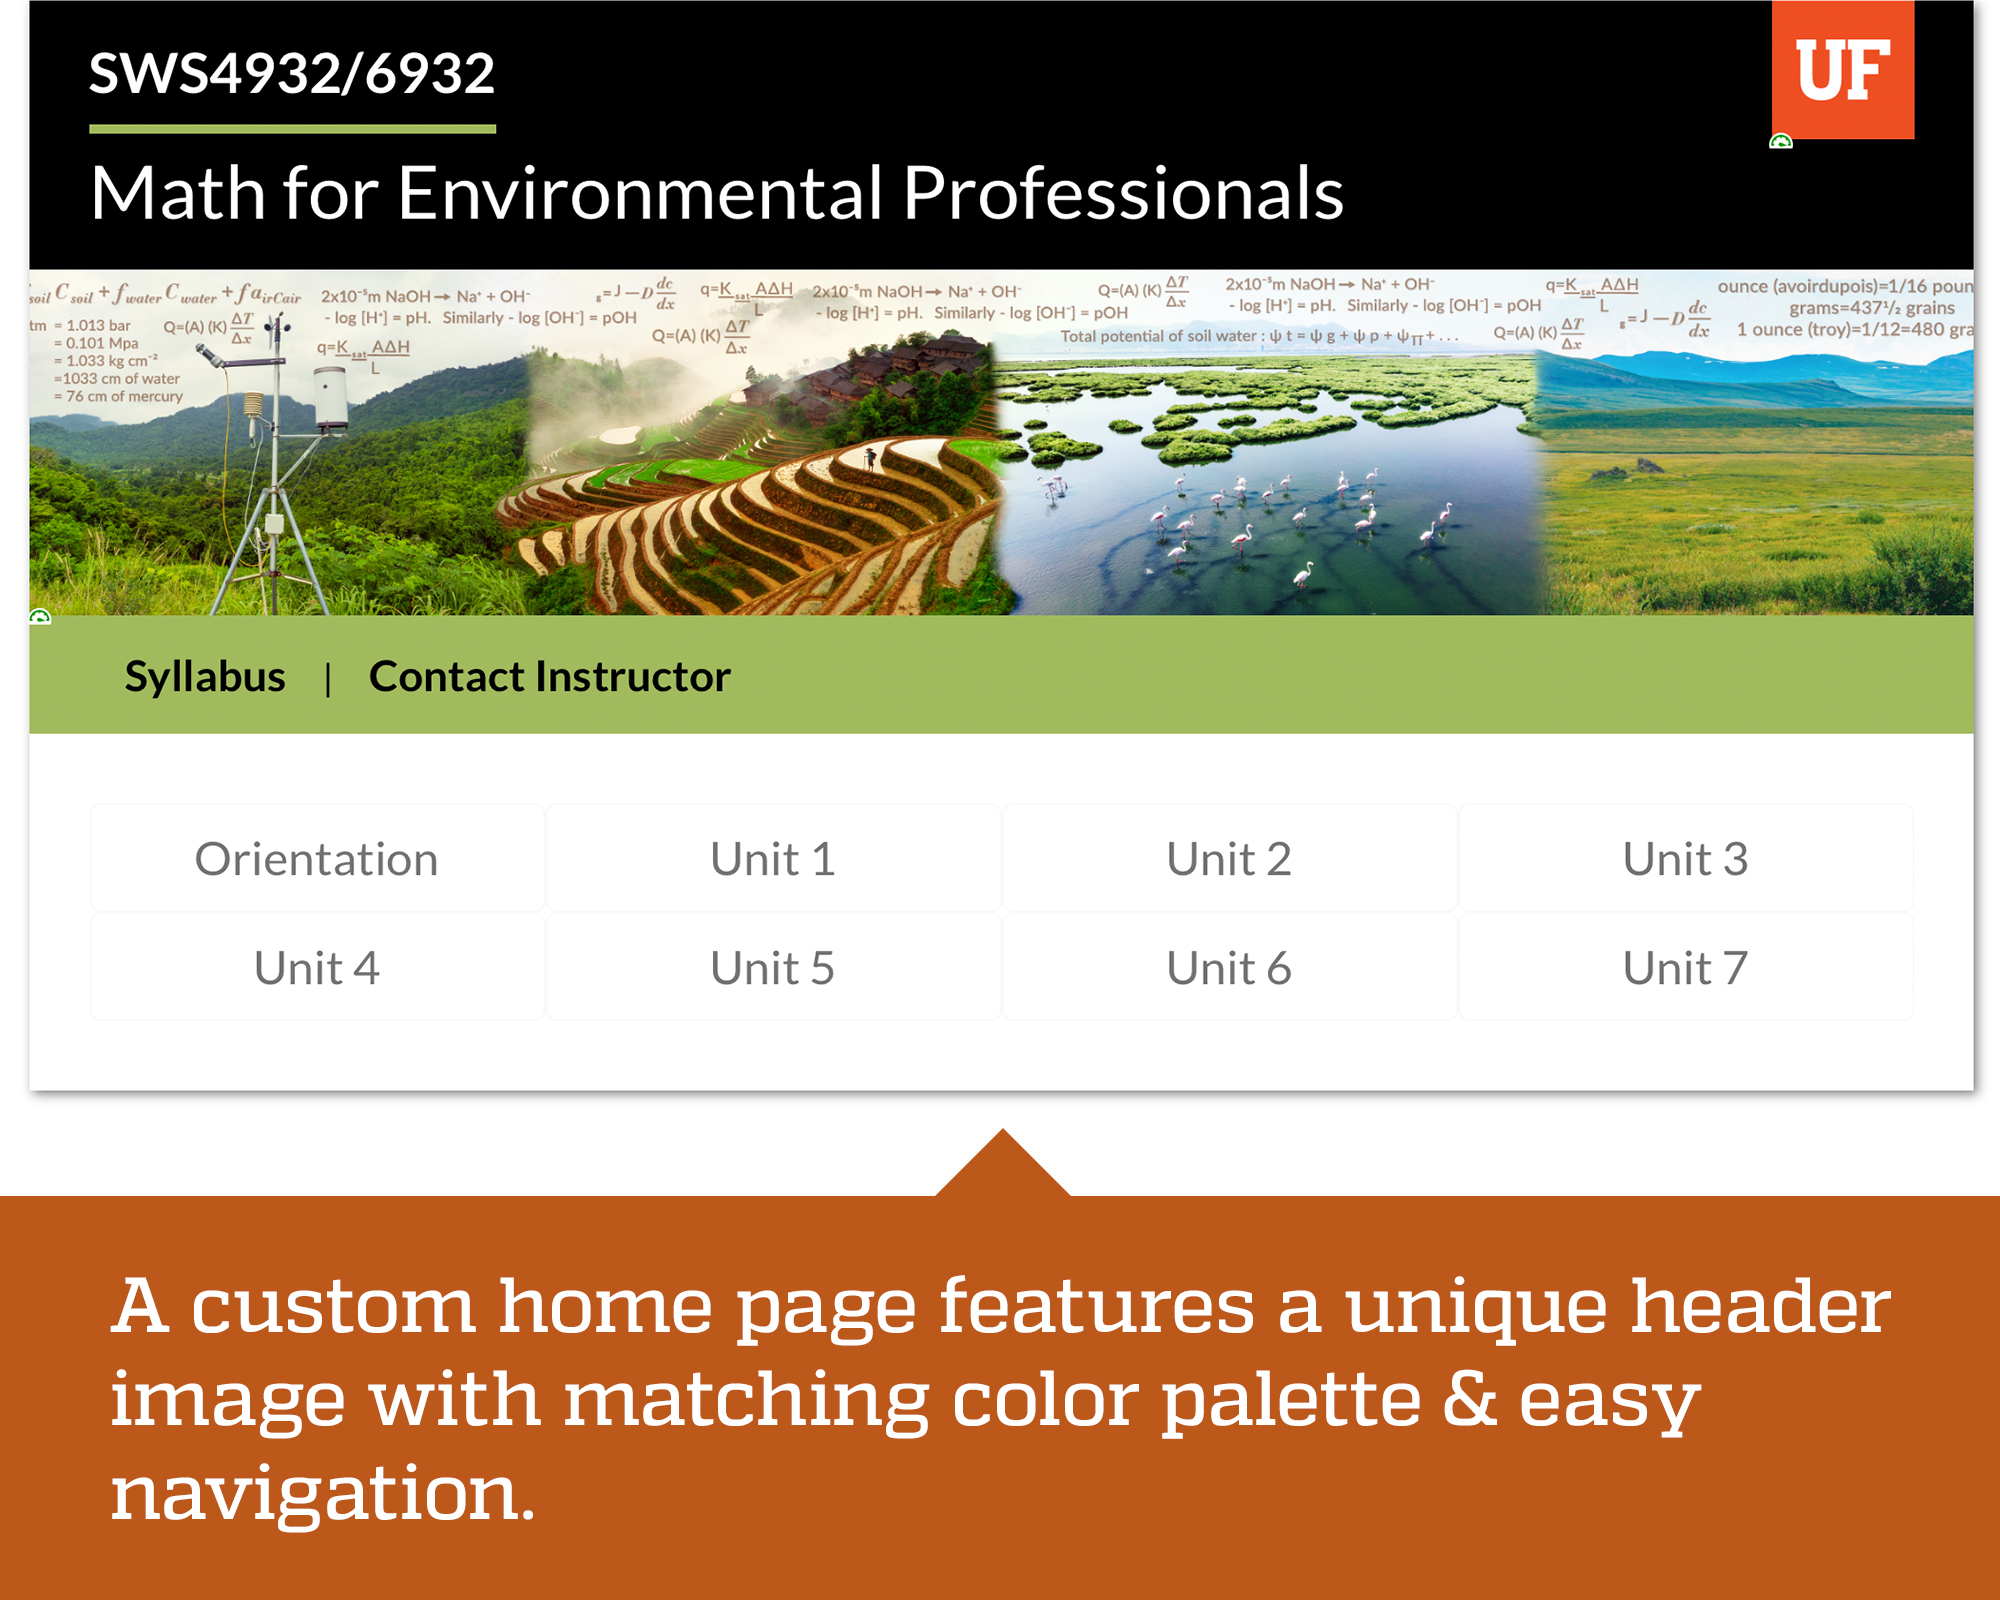 screenshot of a course home page designed by instructional designers at UF COIP